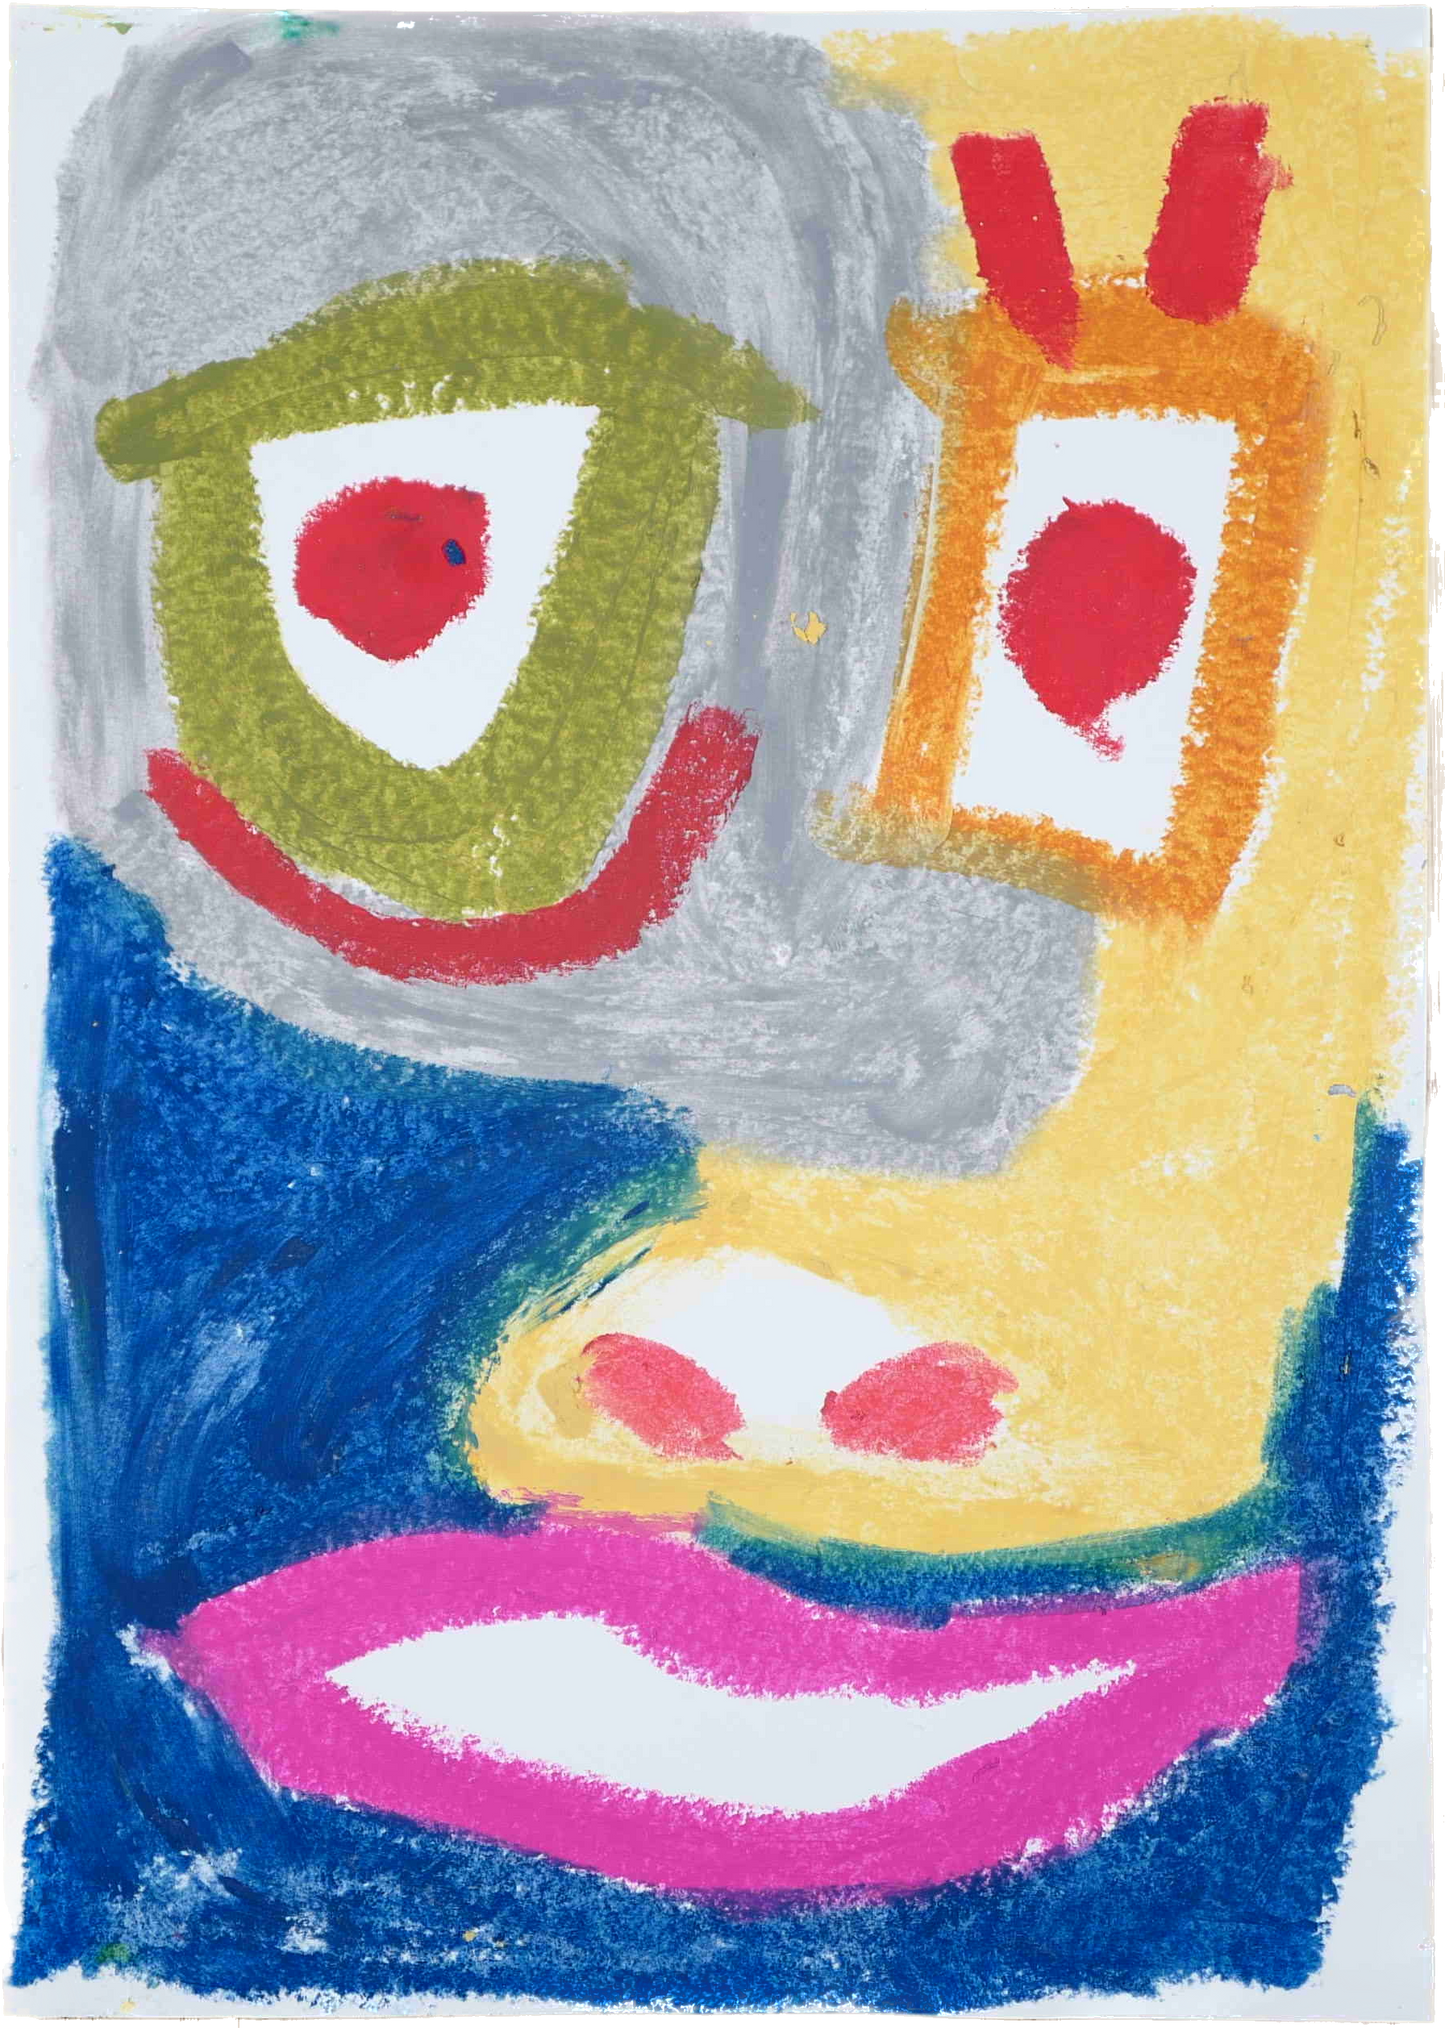 "Abstract eye-like forms in Lenfantvivant artwork" "Vivid oil pastel art in Sauna Fusion series" "Lenfantvivant abstract Sauna Fusion Art on paper" "Colorful abstract face by Lenfantvivant" "Creative abstract interpretation with vibrant pastels"